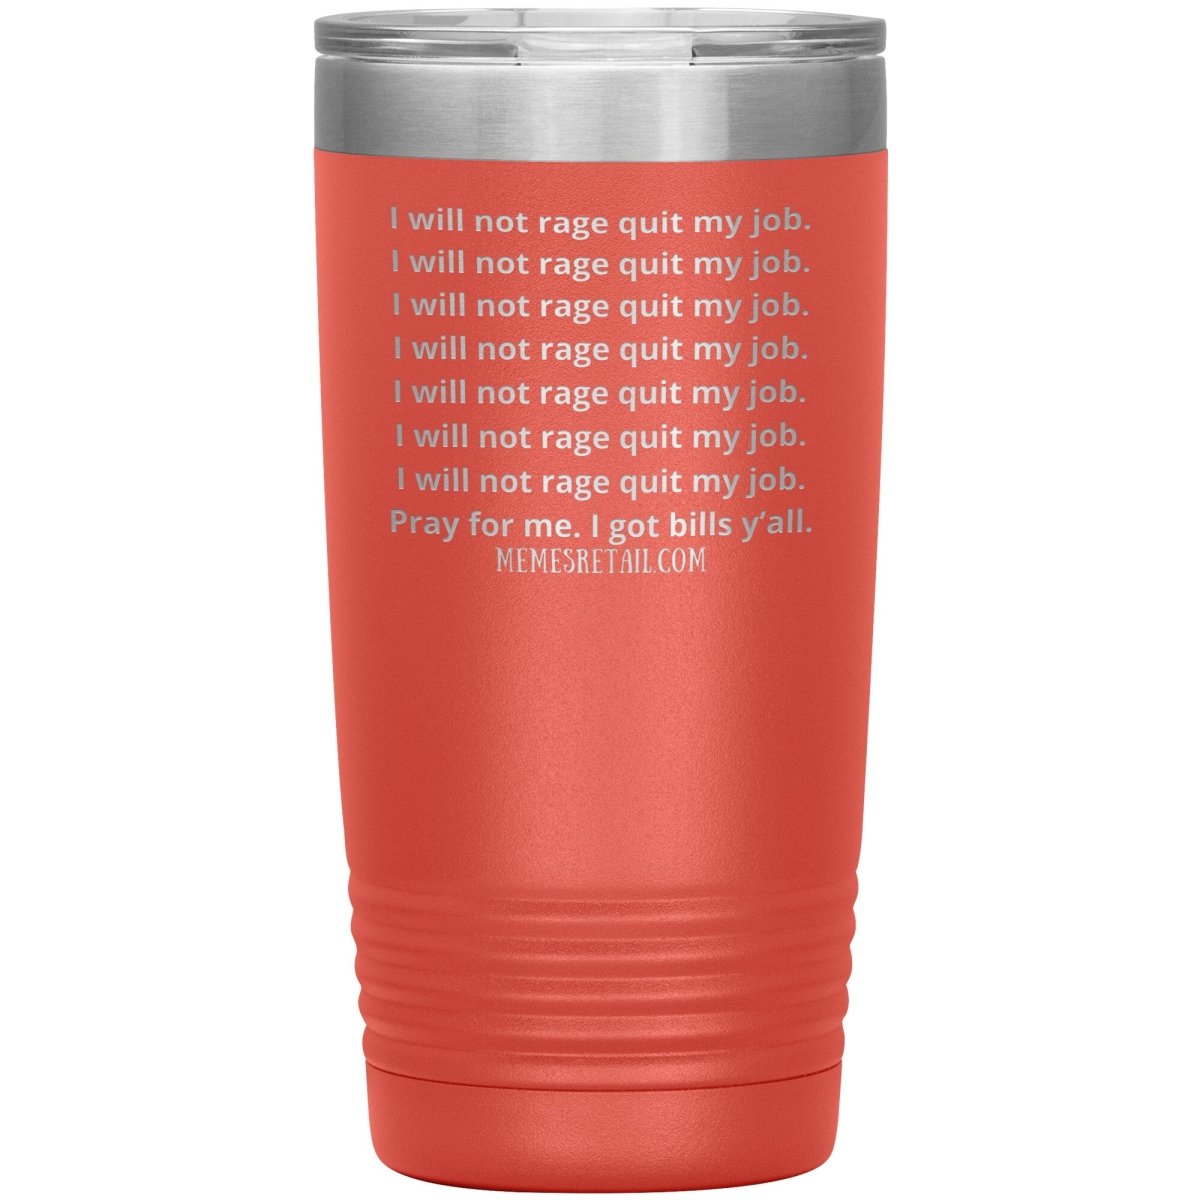 I will not rage quit my job Tumblers, 20oz Insulated Tumbler / Coral - MemesRetail.com